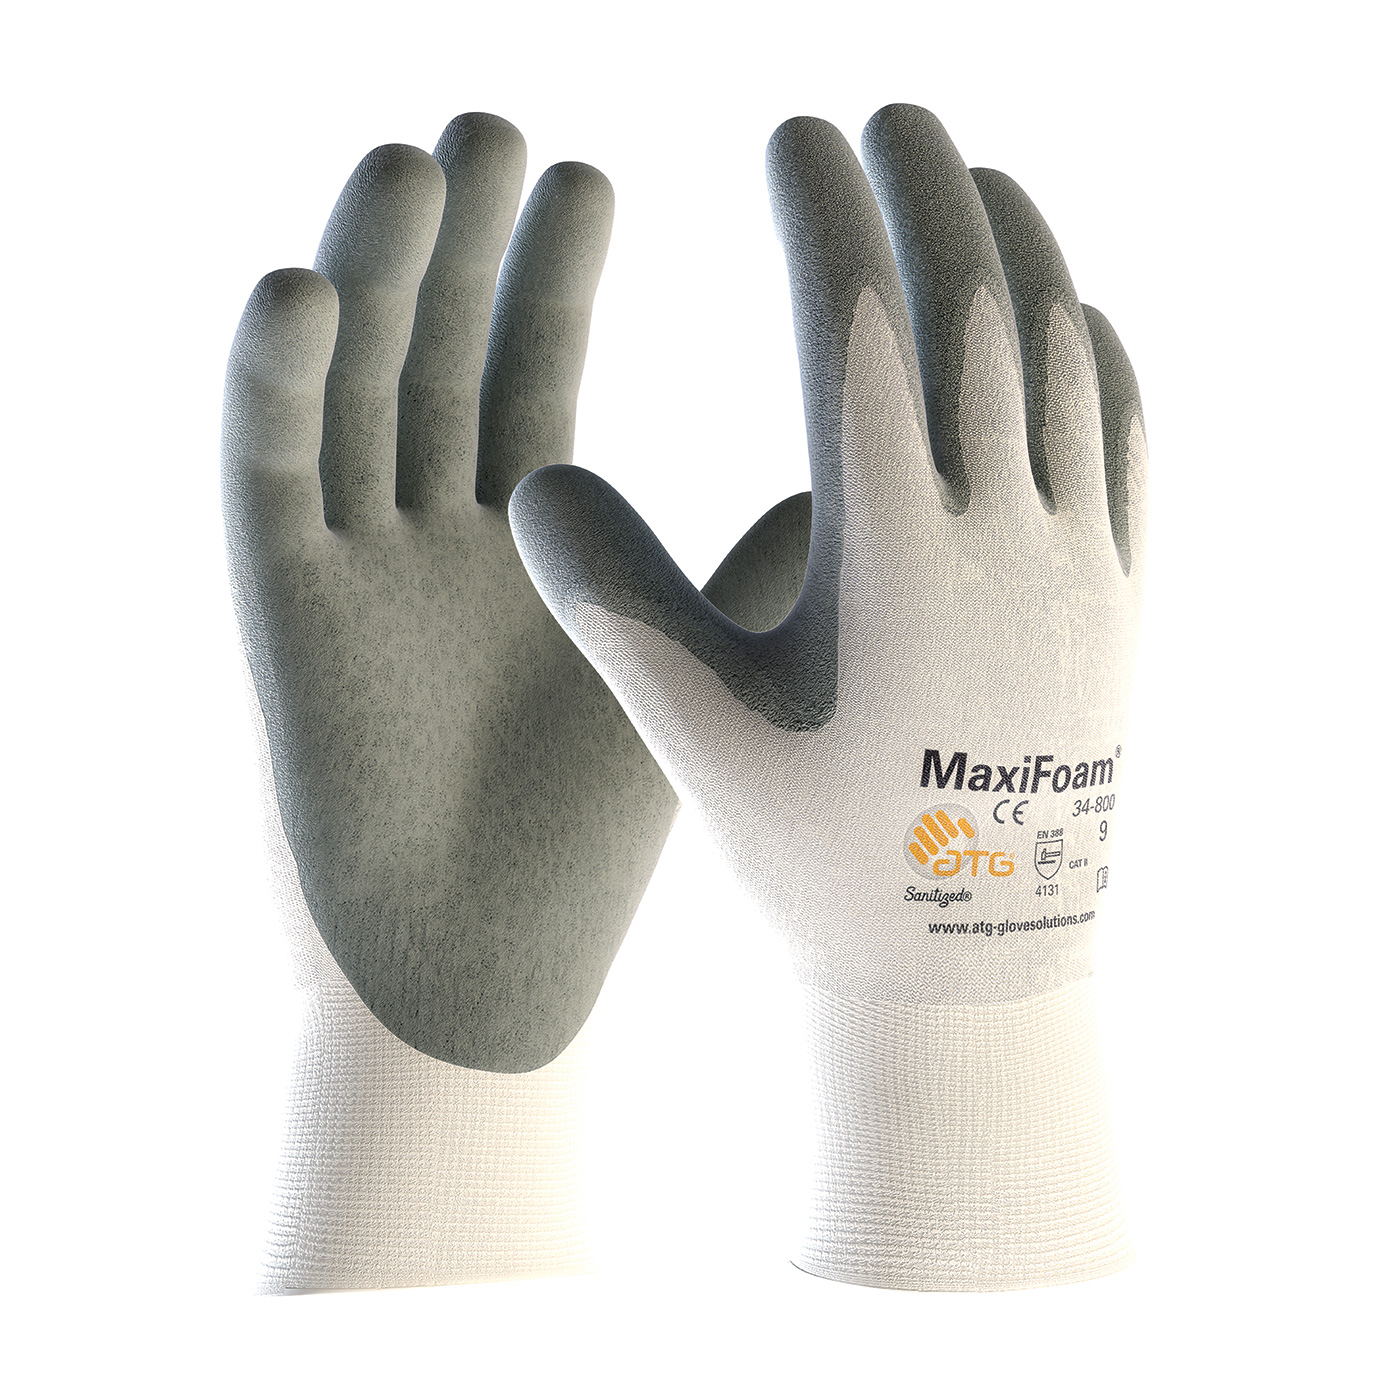 PIP 34-800/XL MaxiFoam Premium Eeamless Knit Nylon Glove with Nitrile Coated Foam Grip on Palm & Fingers - X-Large PID-34 800 XL